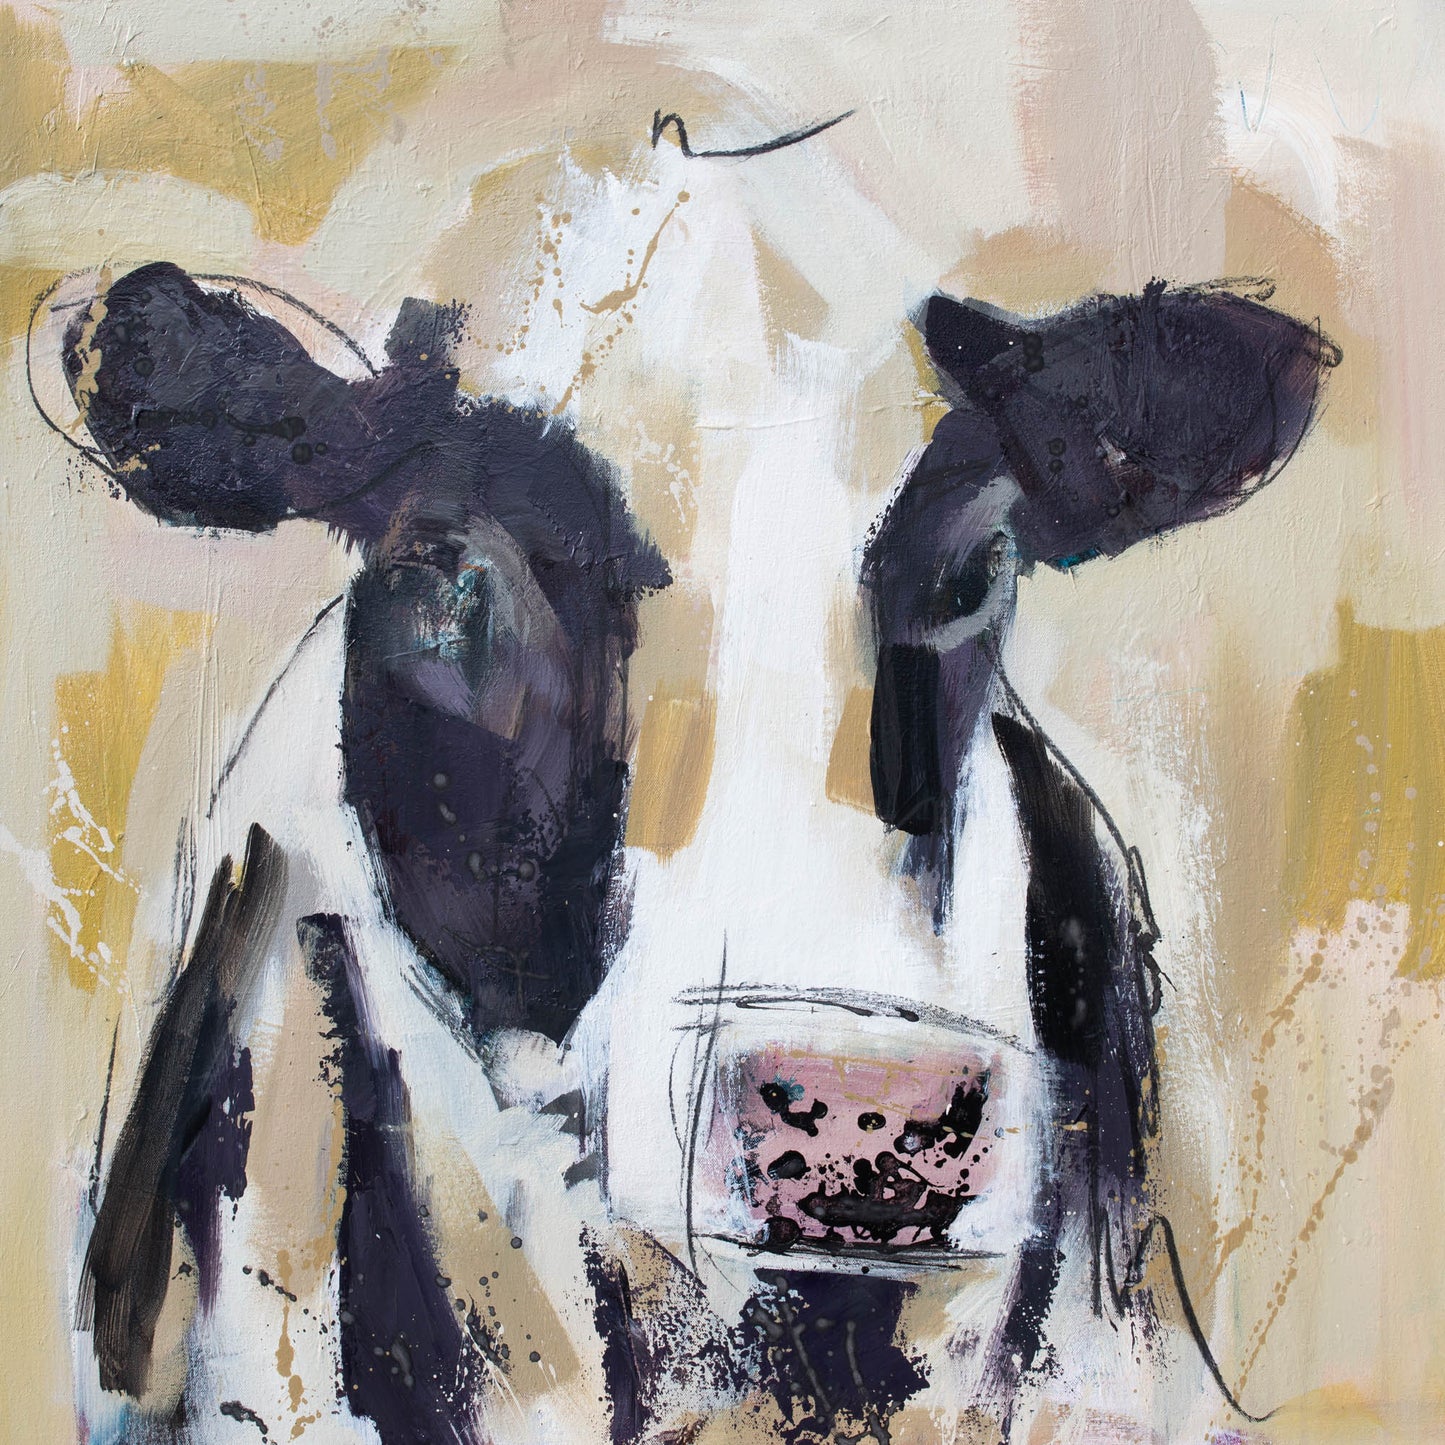 Shadow - Abstract Cow by Australian Artist Rose Hewartson Original Abstract Painting on Canvas Framed 96x123 cm Statement Piece